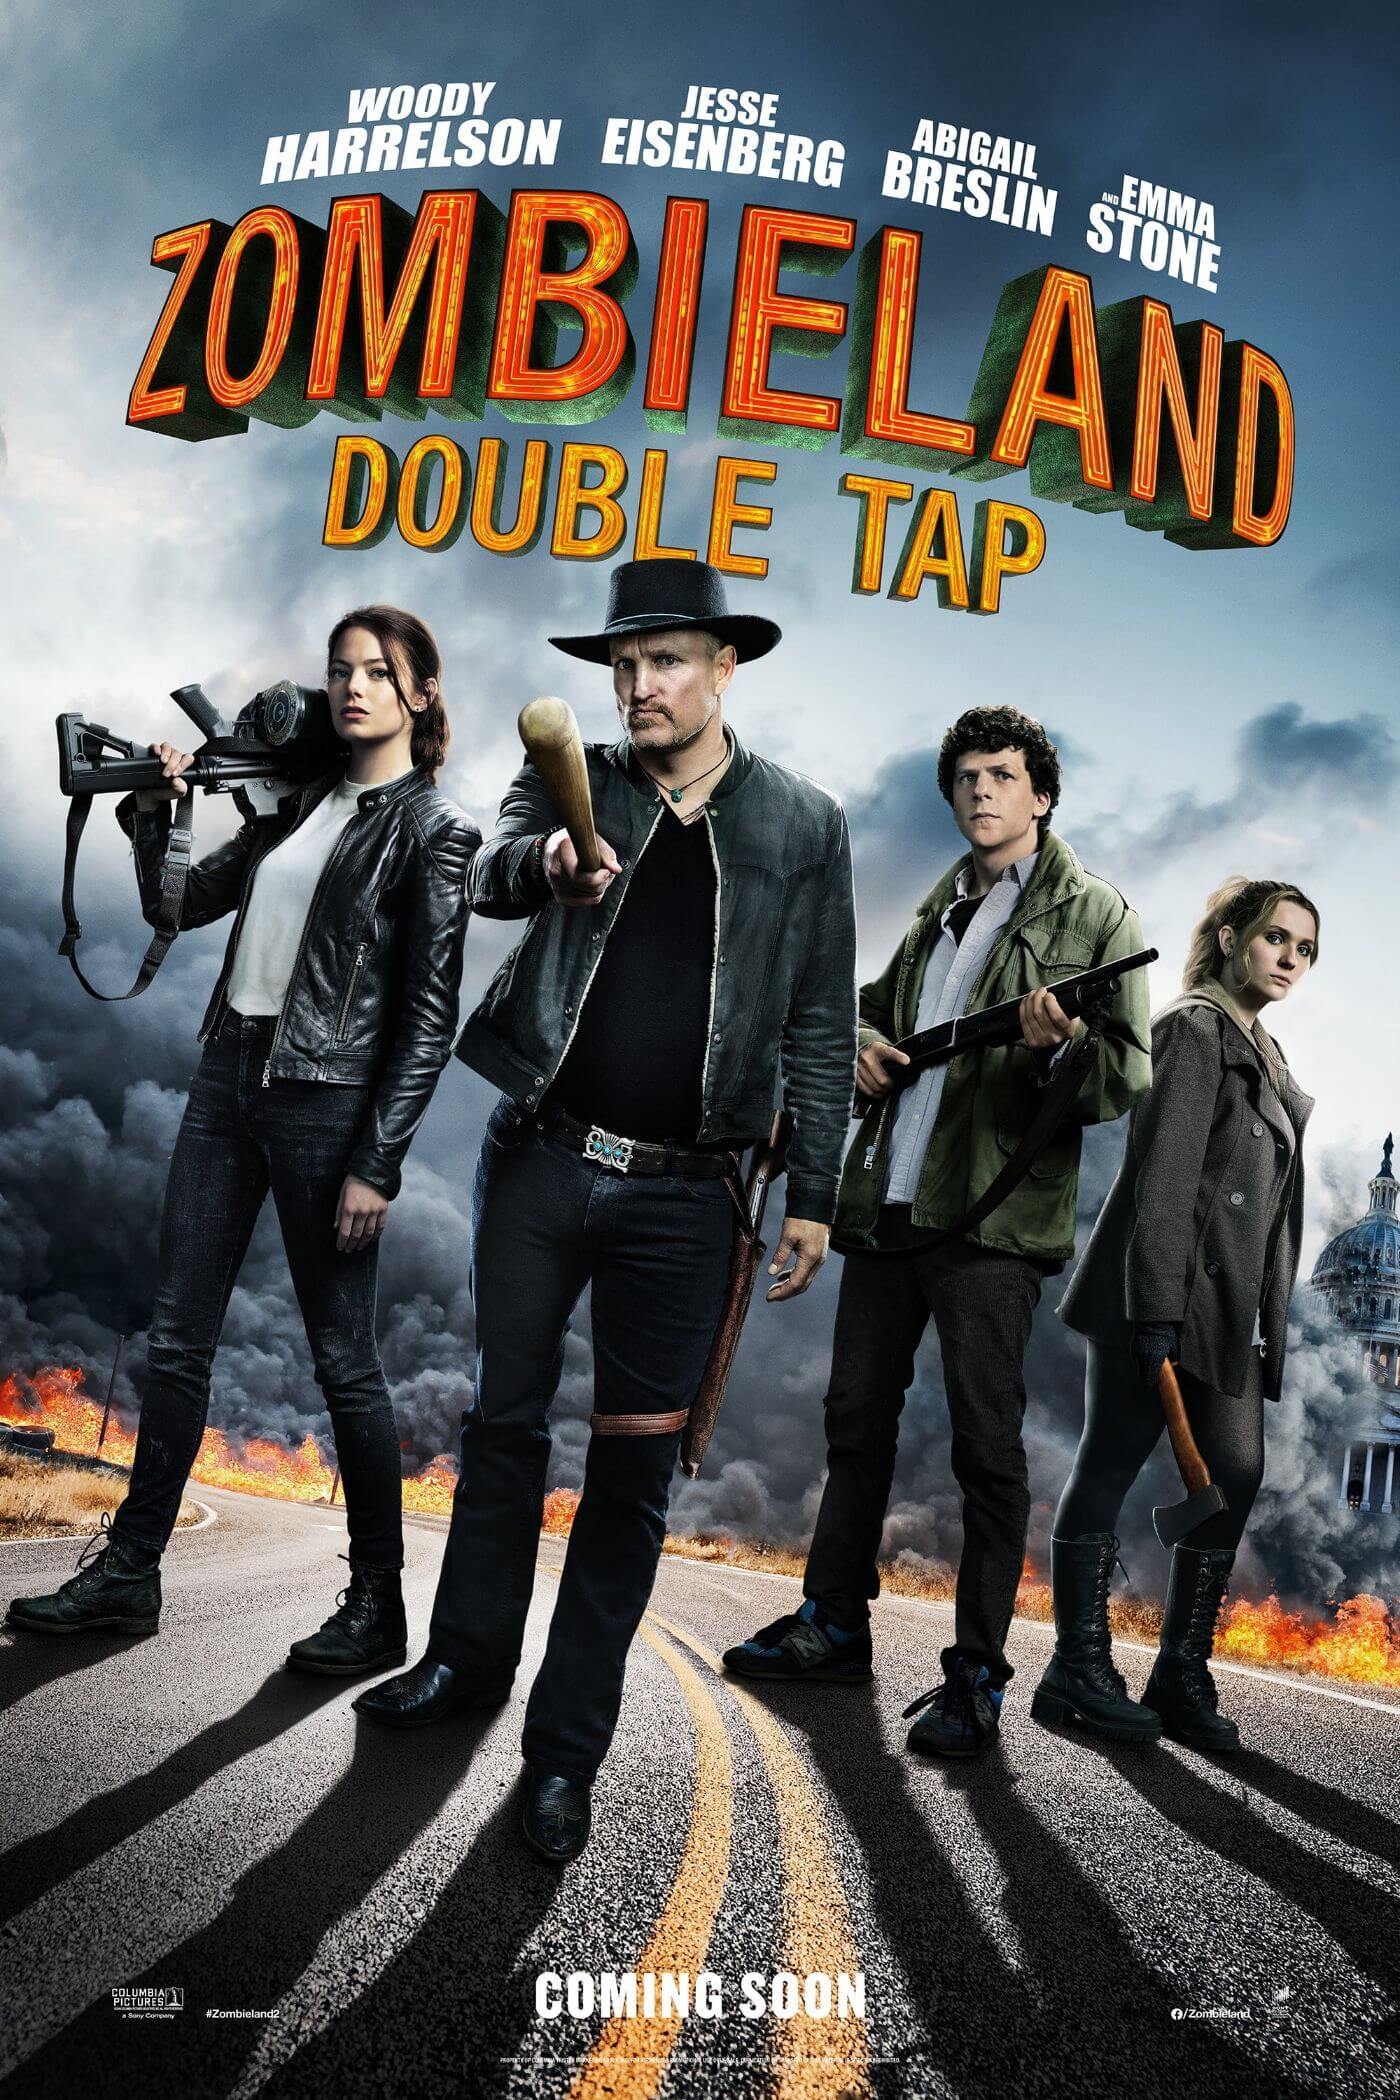 Zombieland Double Tap Woody Harrelson Emma Stone Hollywood Action Movie Poster Life Size Posters By Kaiden Thompson Buy Posters Frames Canvas Digital Art Prints Small Compact Medium And Large Variants